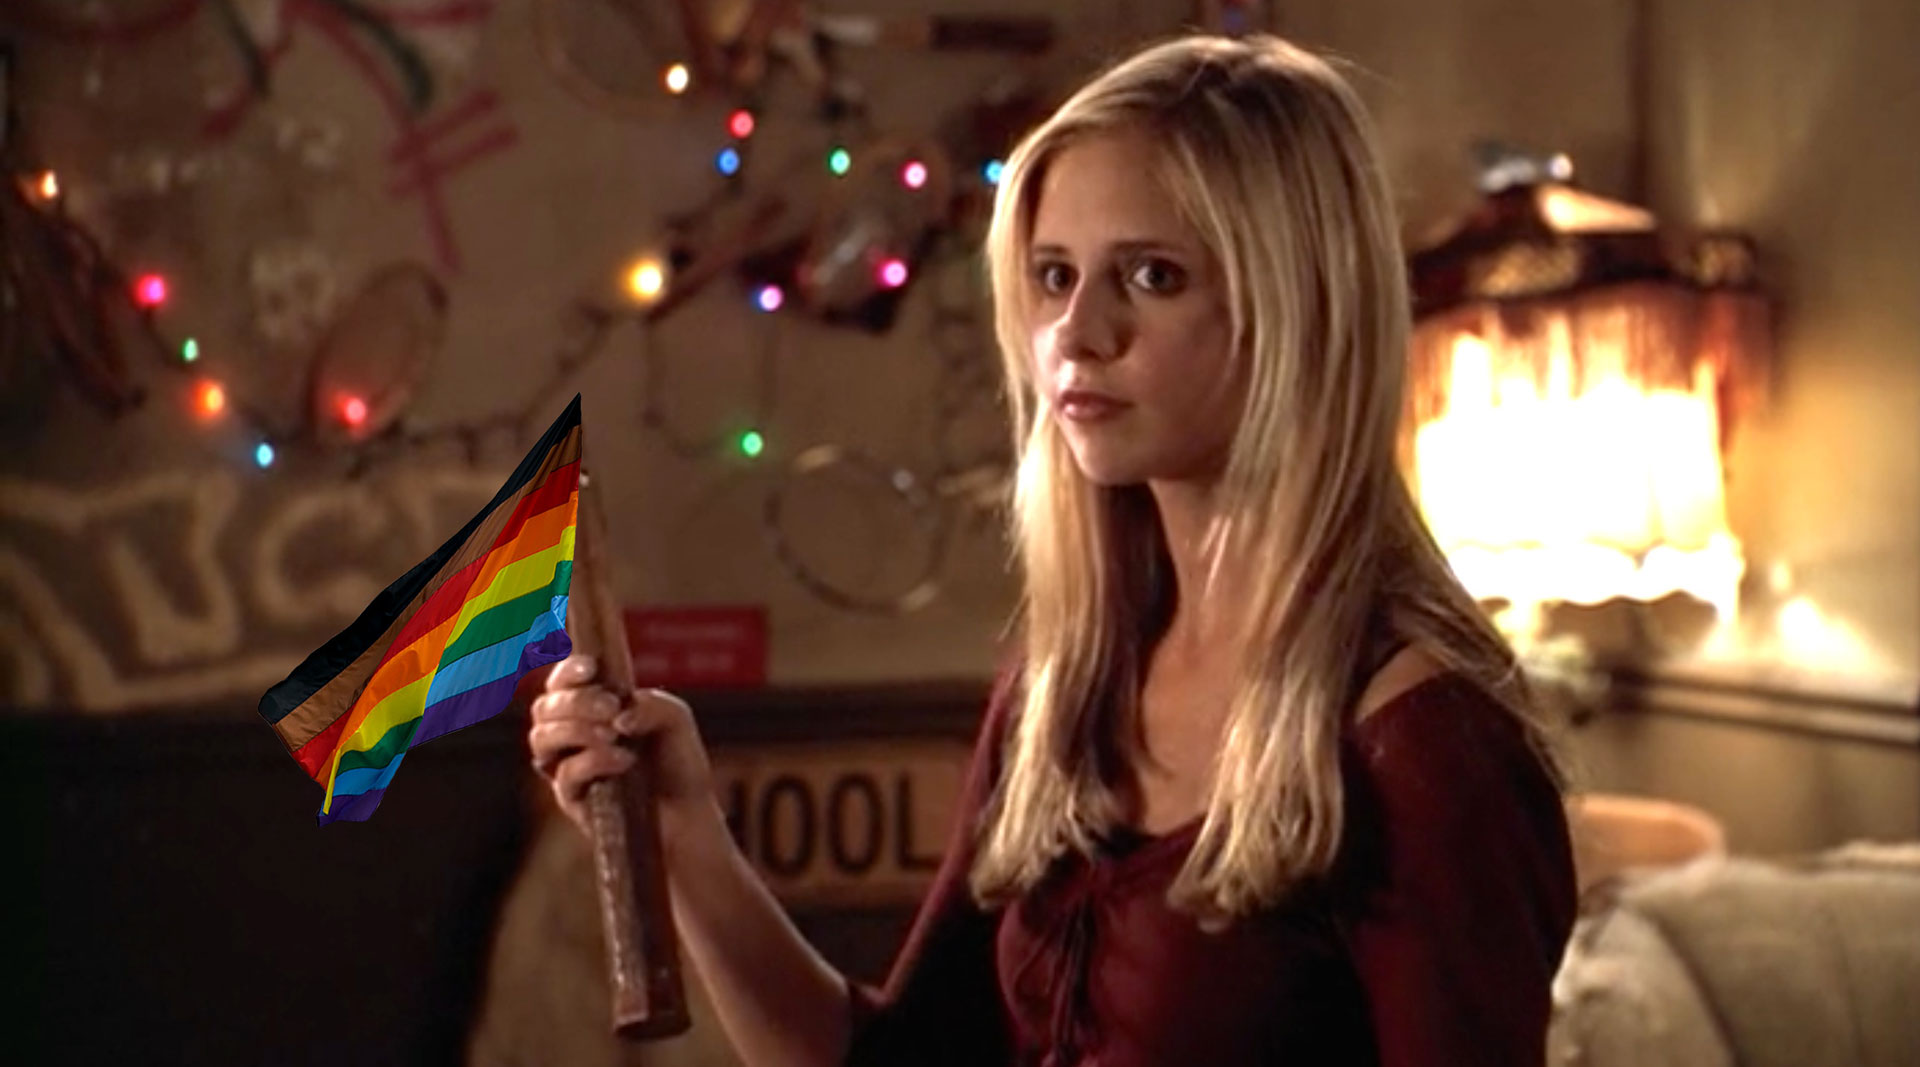 Actress Sarah Michelle Geller as Buffy Summers holding a wooden stake that has been edited to be the mast of a Pride flag.